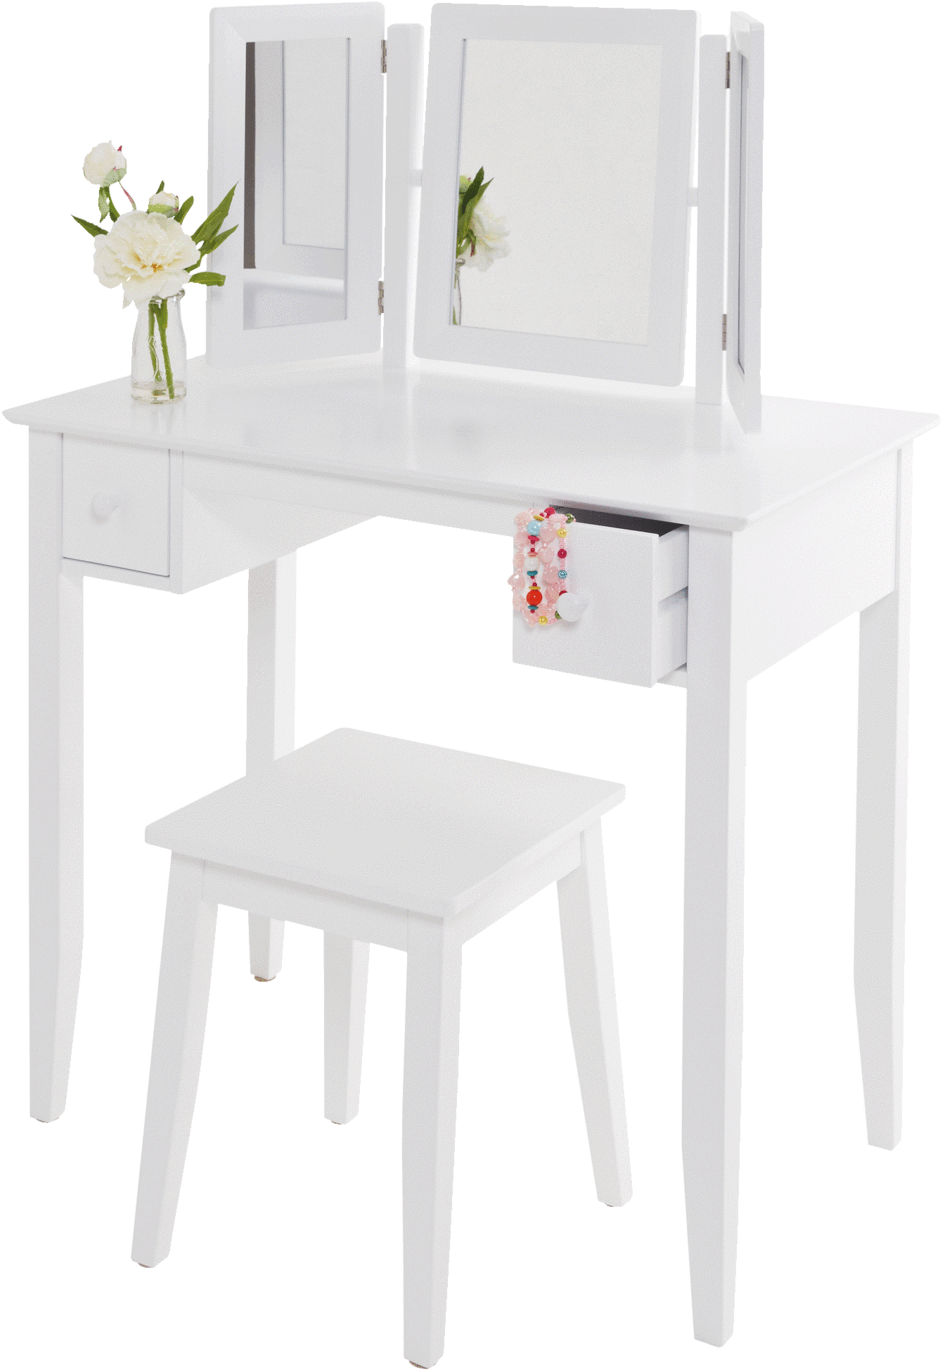 A White Table With A Mirror And Stool